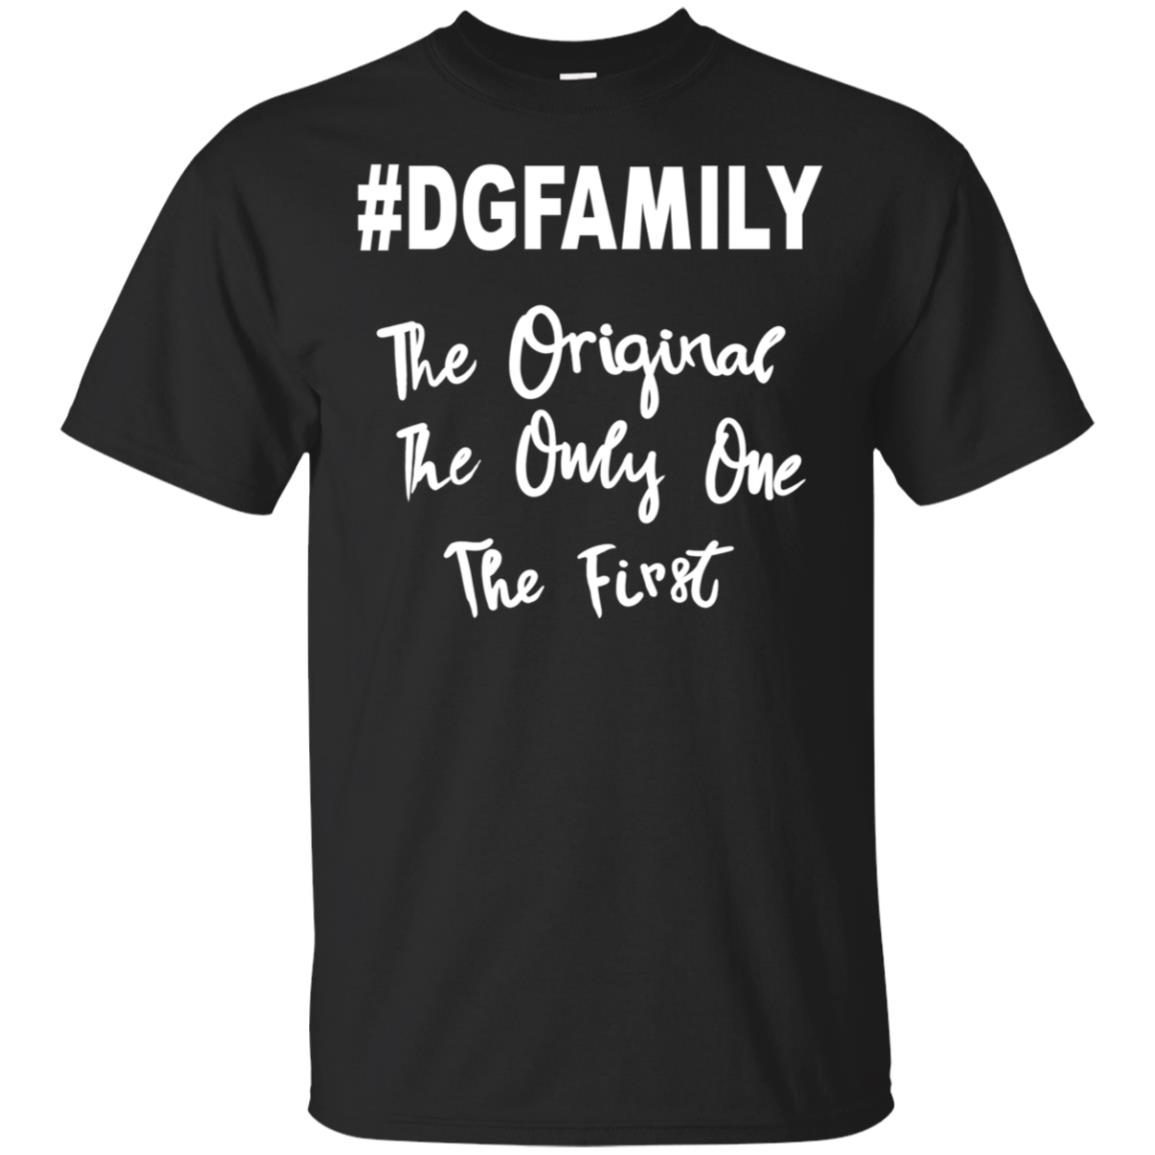 #DGFAMILY The Original The Only One The First shirts Hoodie Tank-Top Quotes